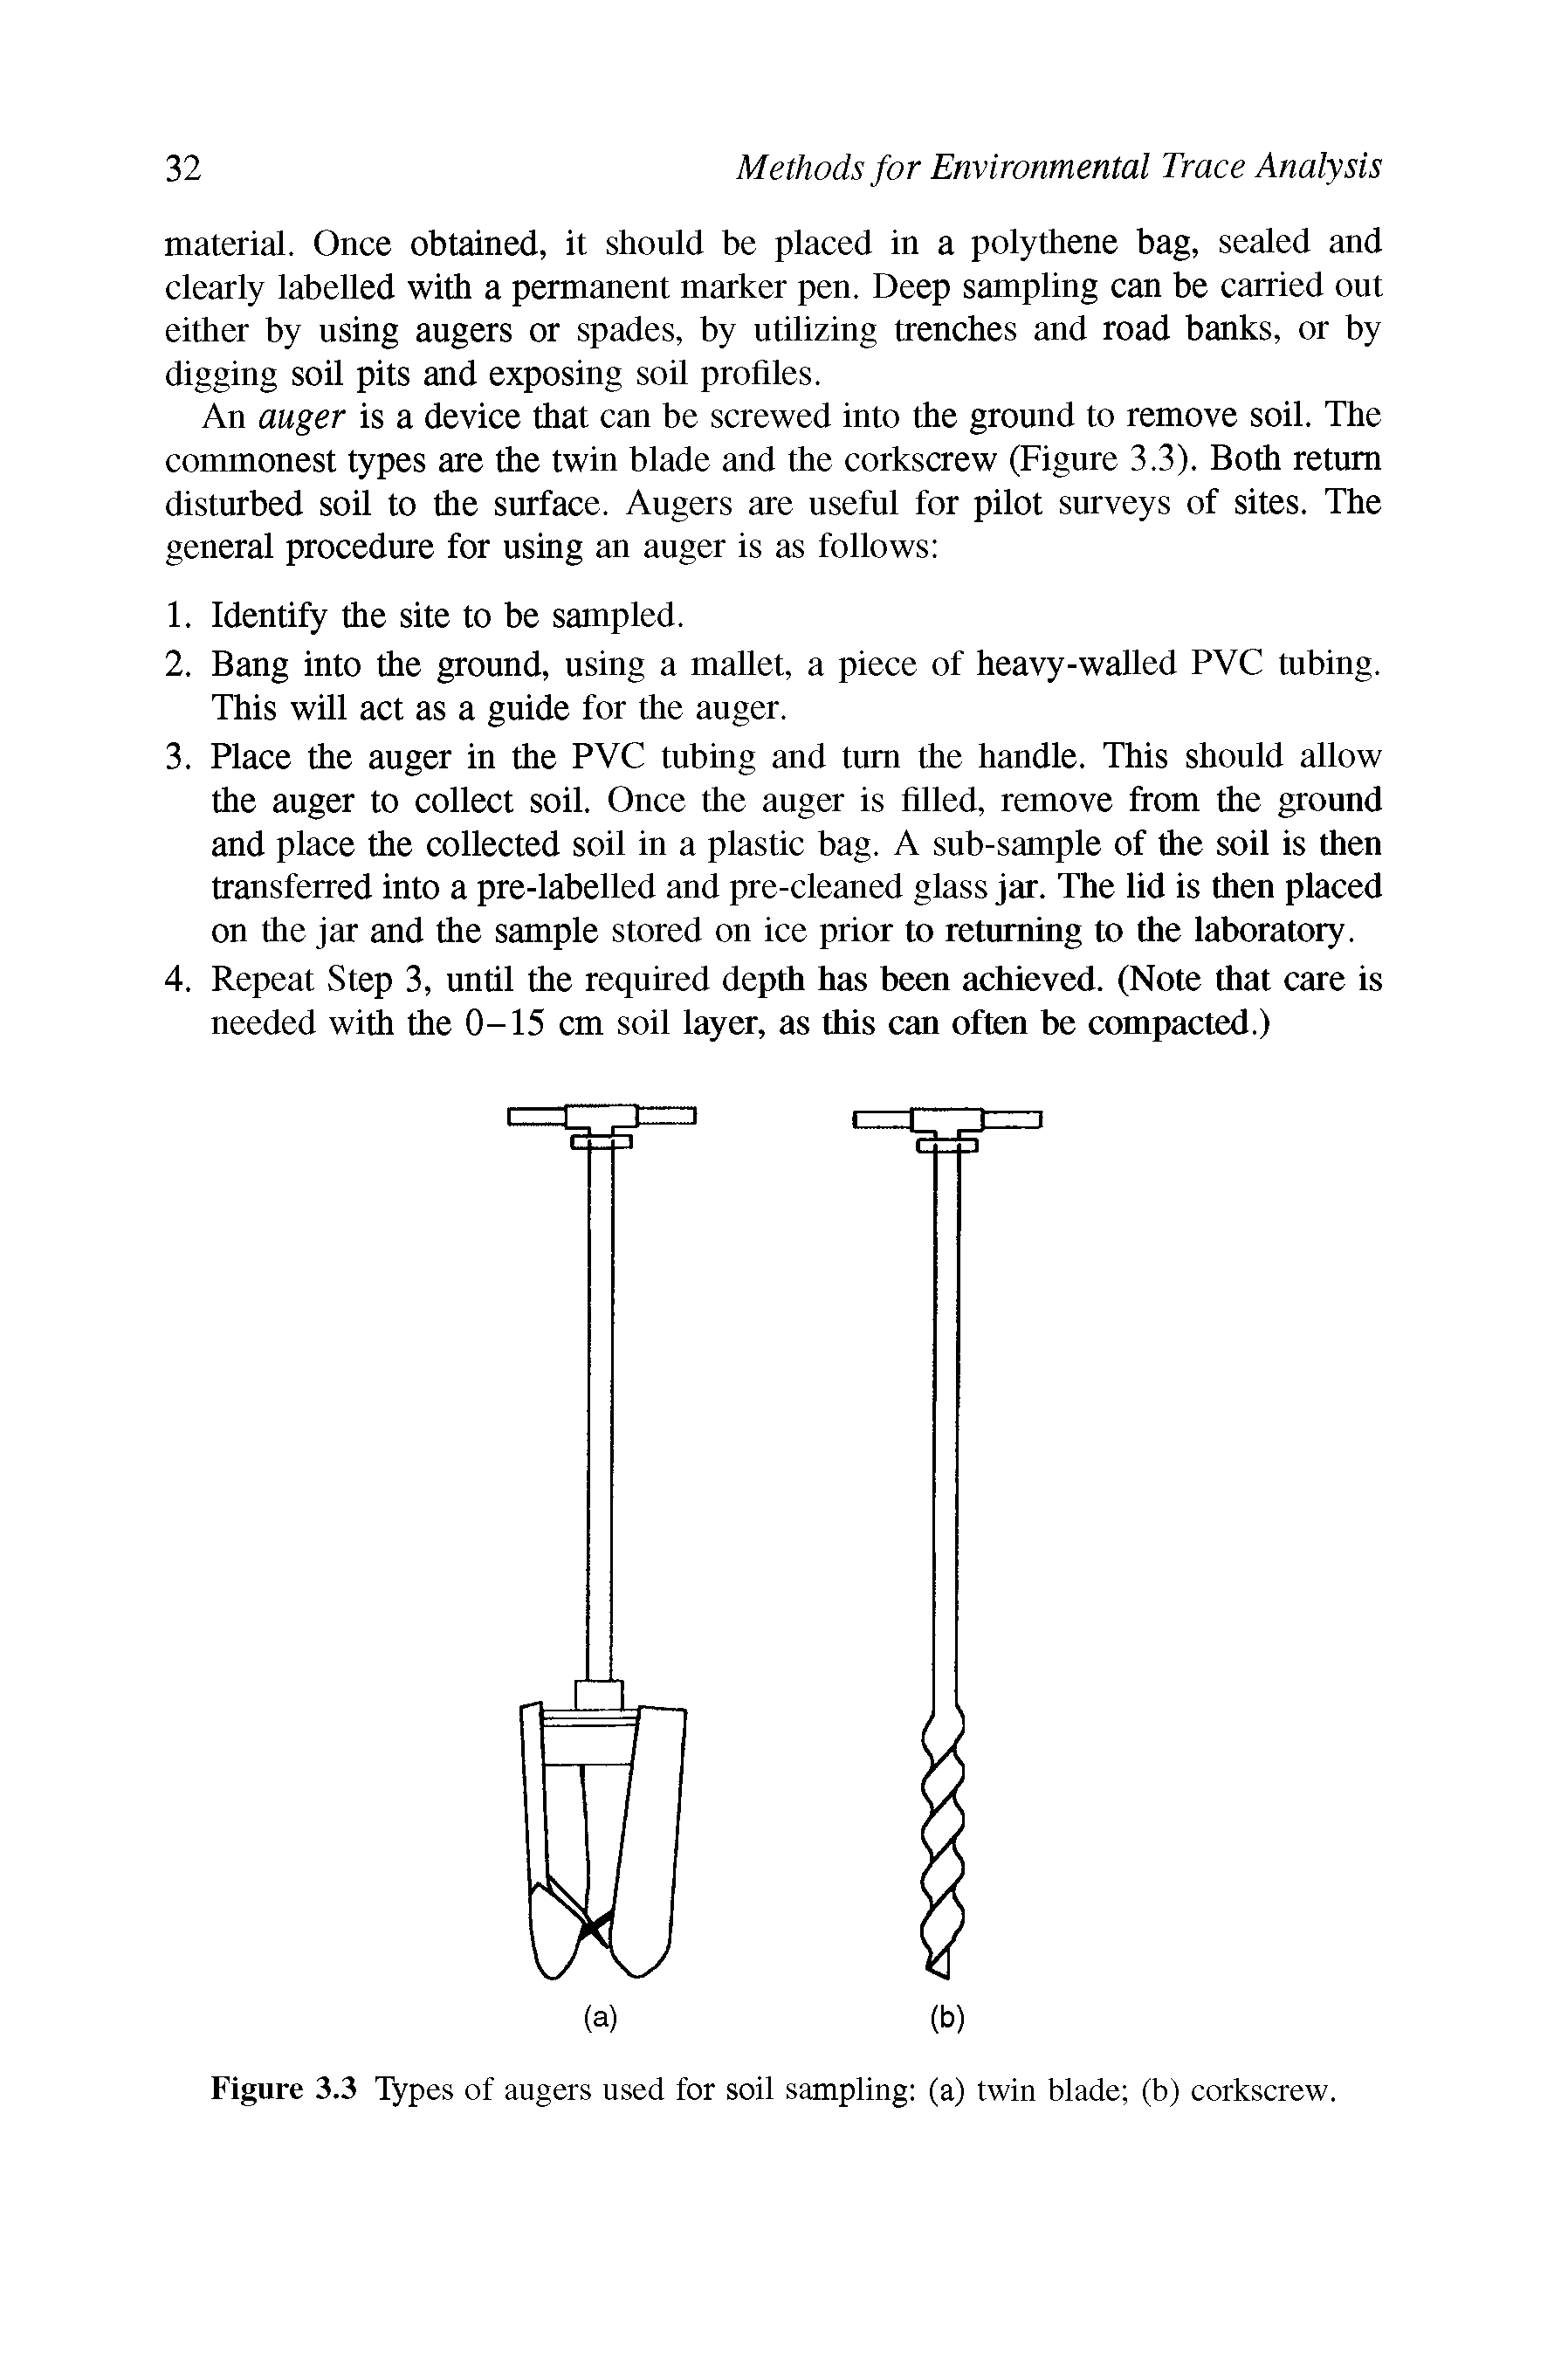 Figure 3.3 Types of augers used for soil sampling (a) twin blade (b) corkscrew.